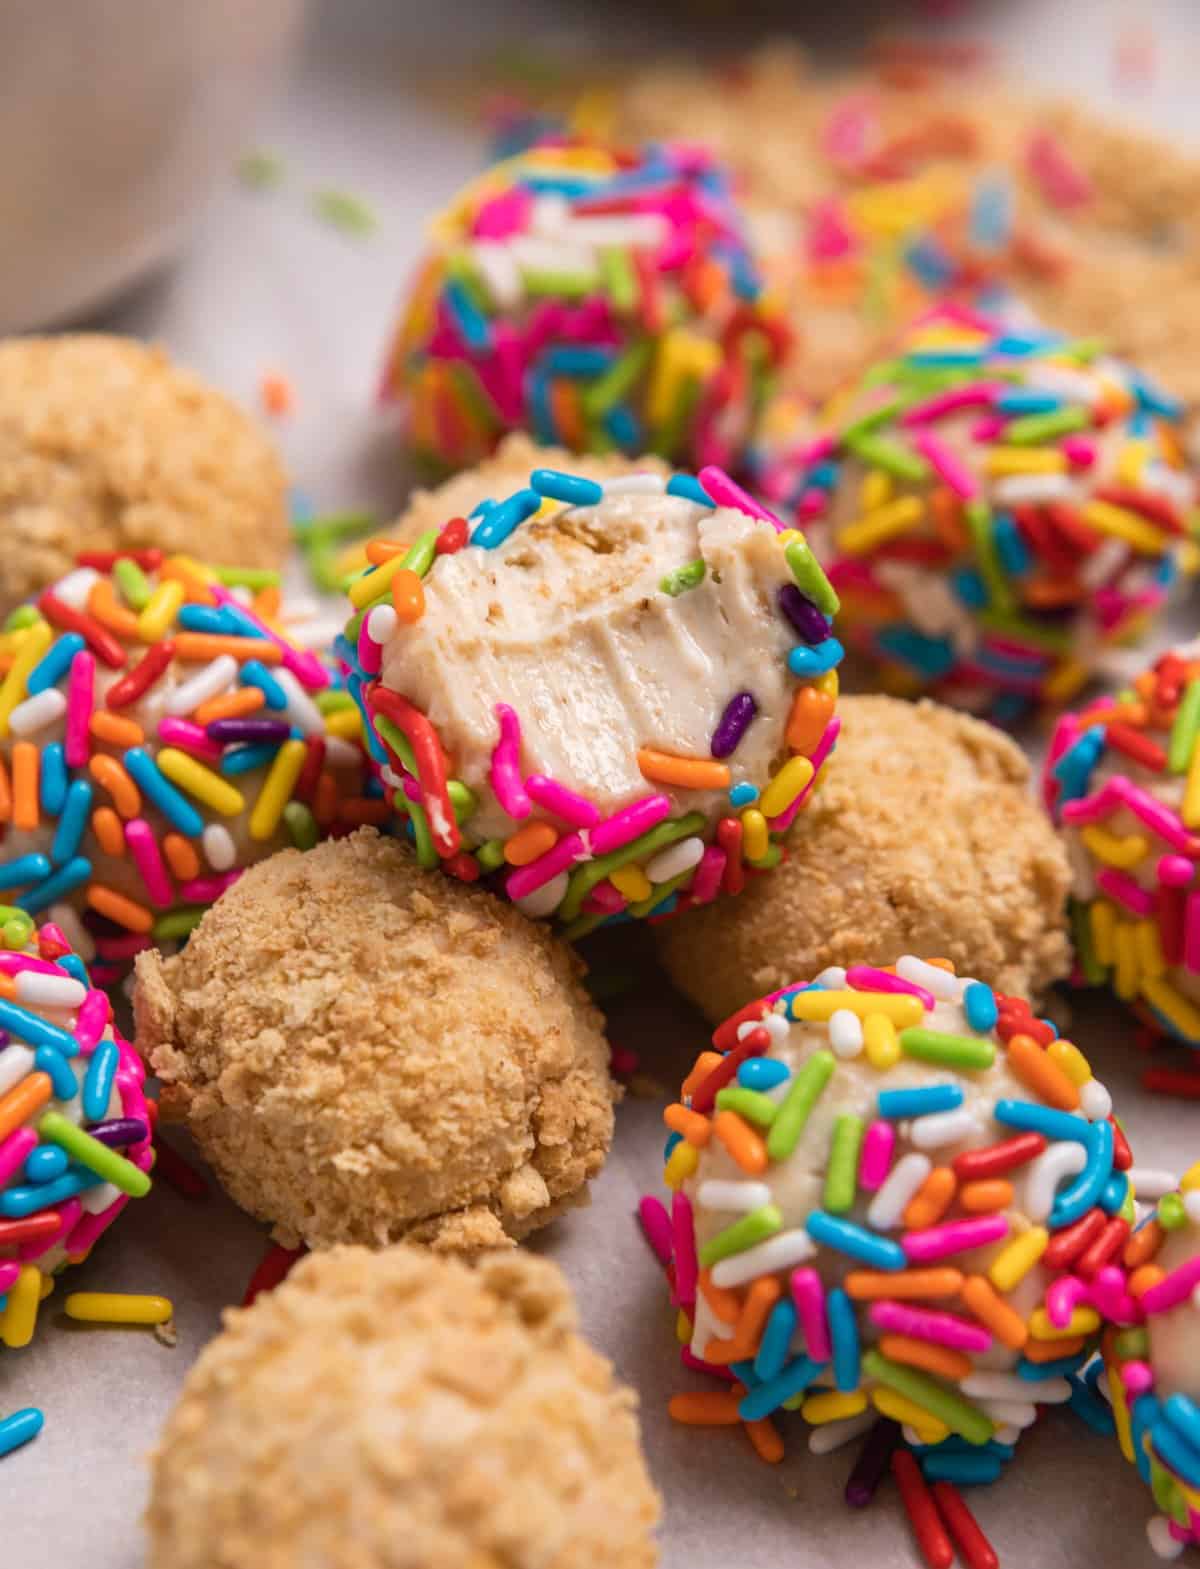 Cheesecake balls covered in sprinkles and crushed graham crackers with bite taken out of one ball.